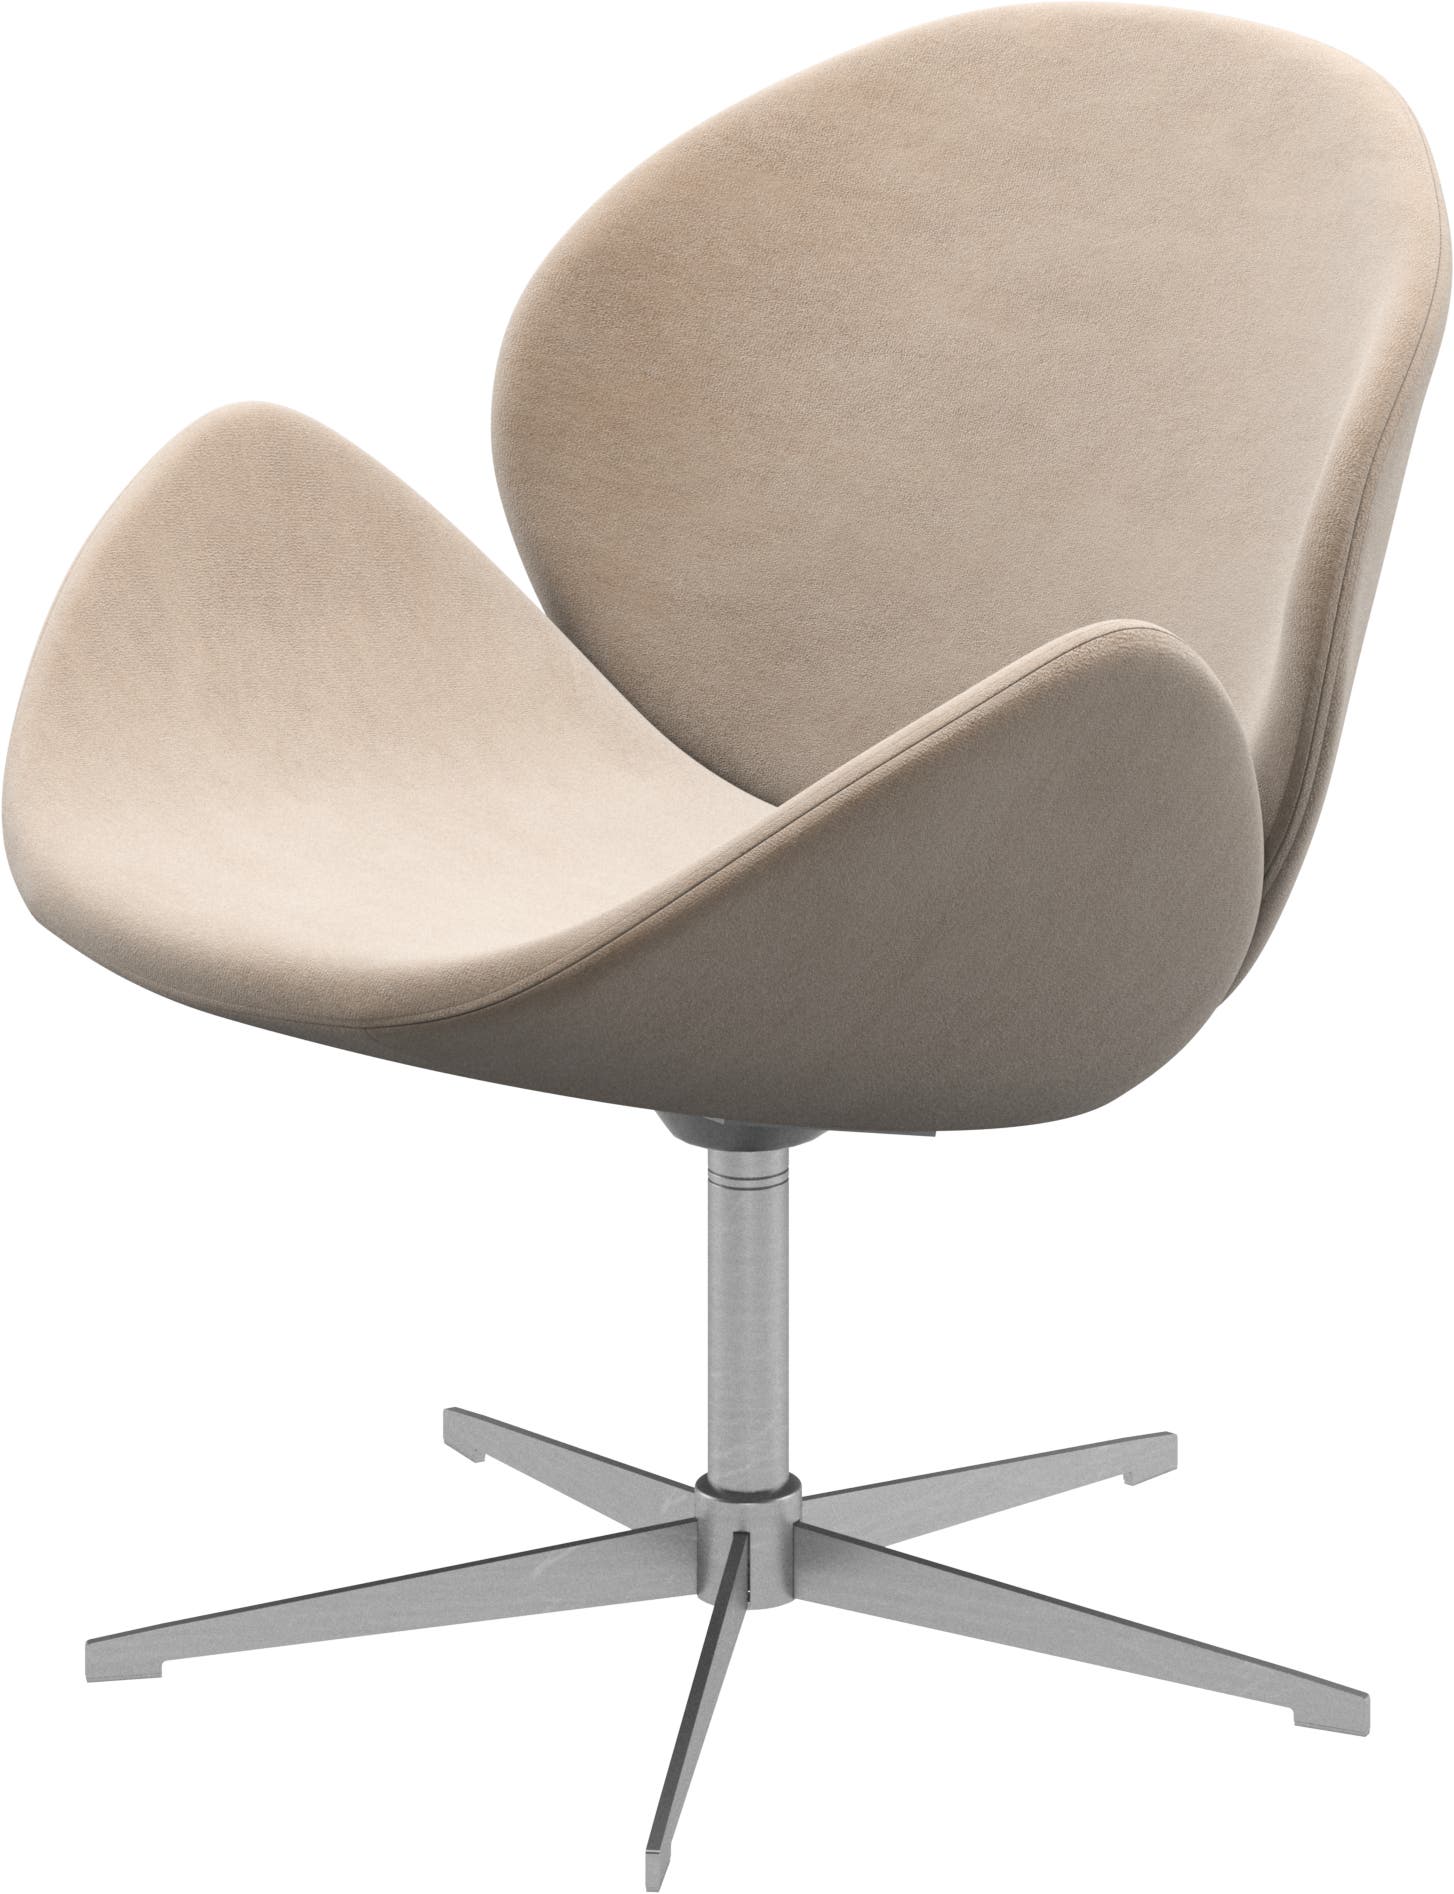 Ogi chair with swivel function